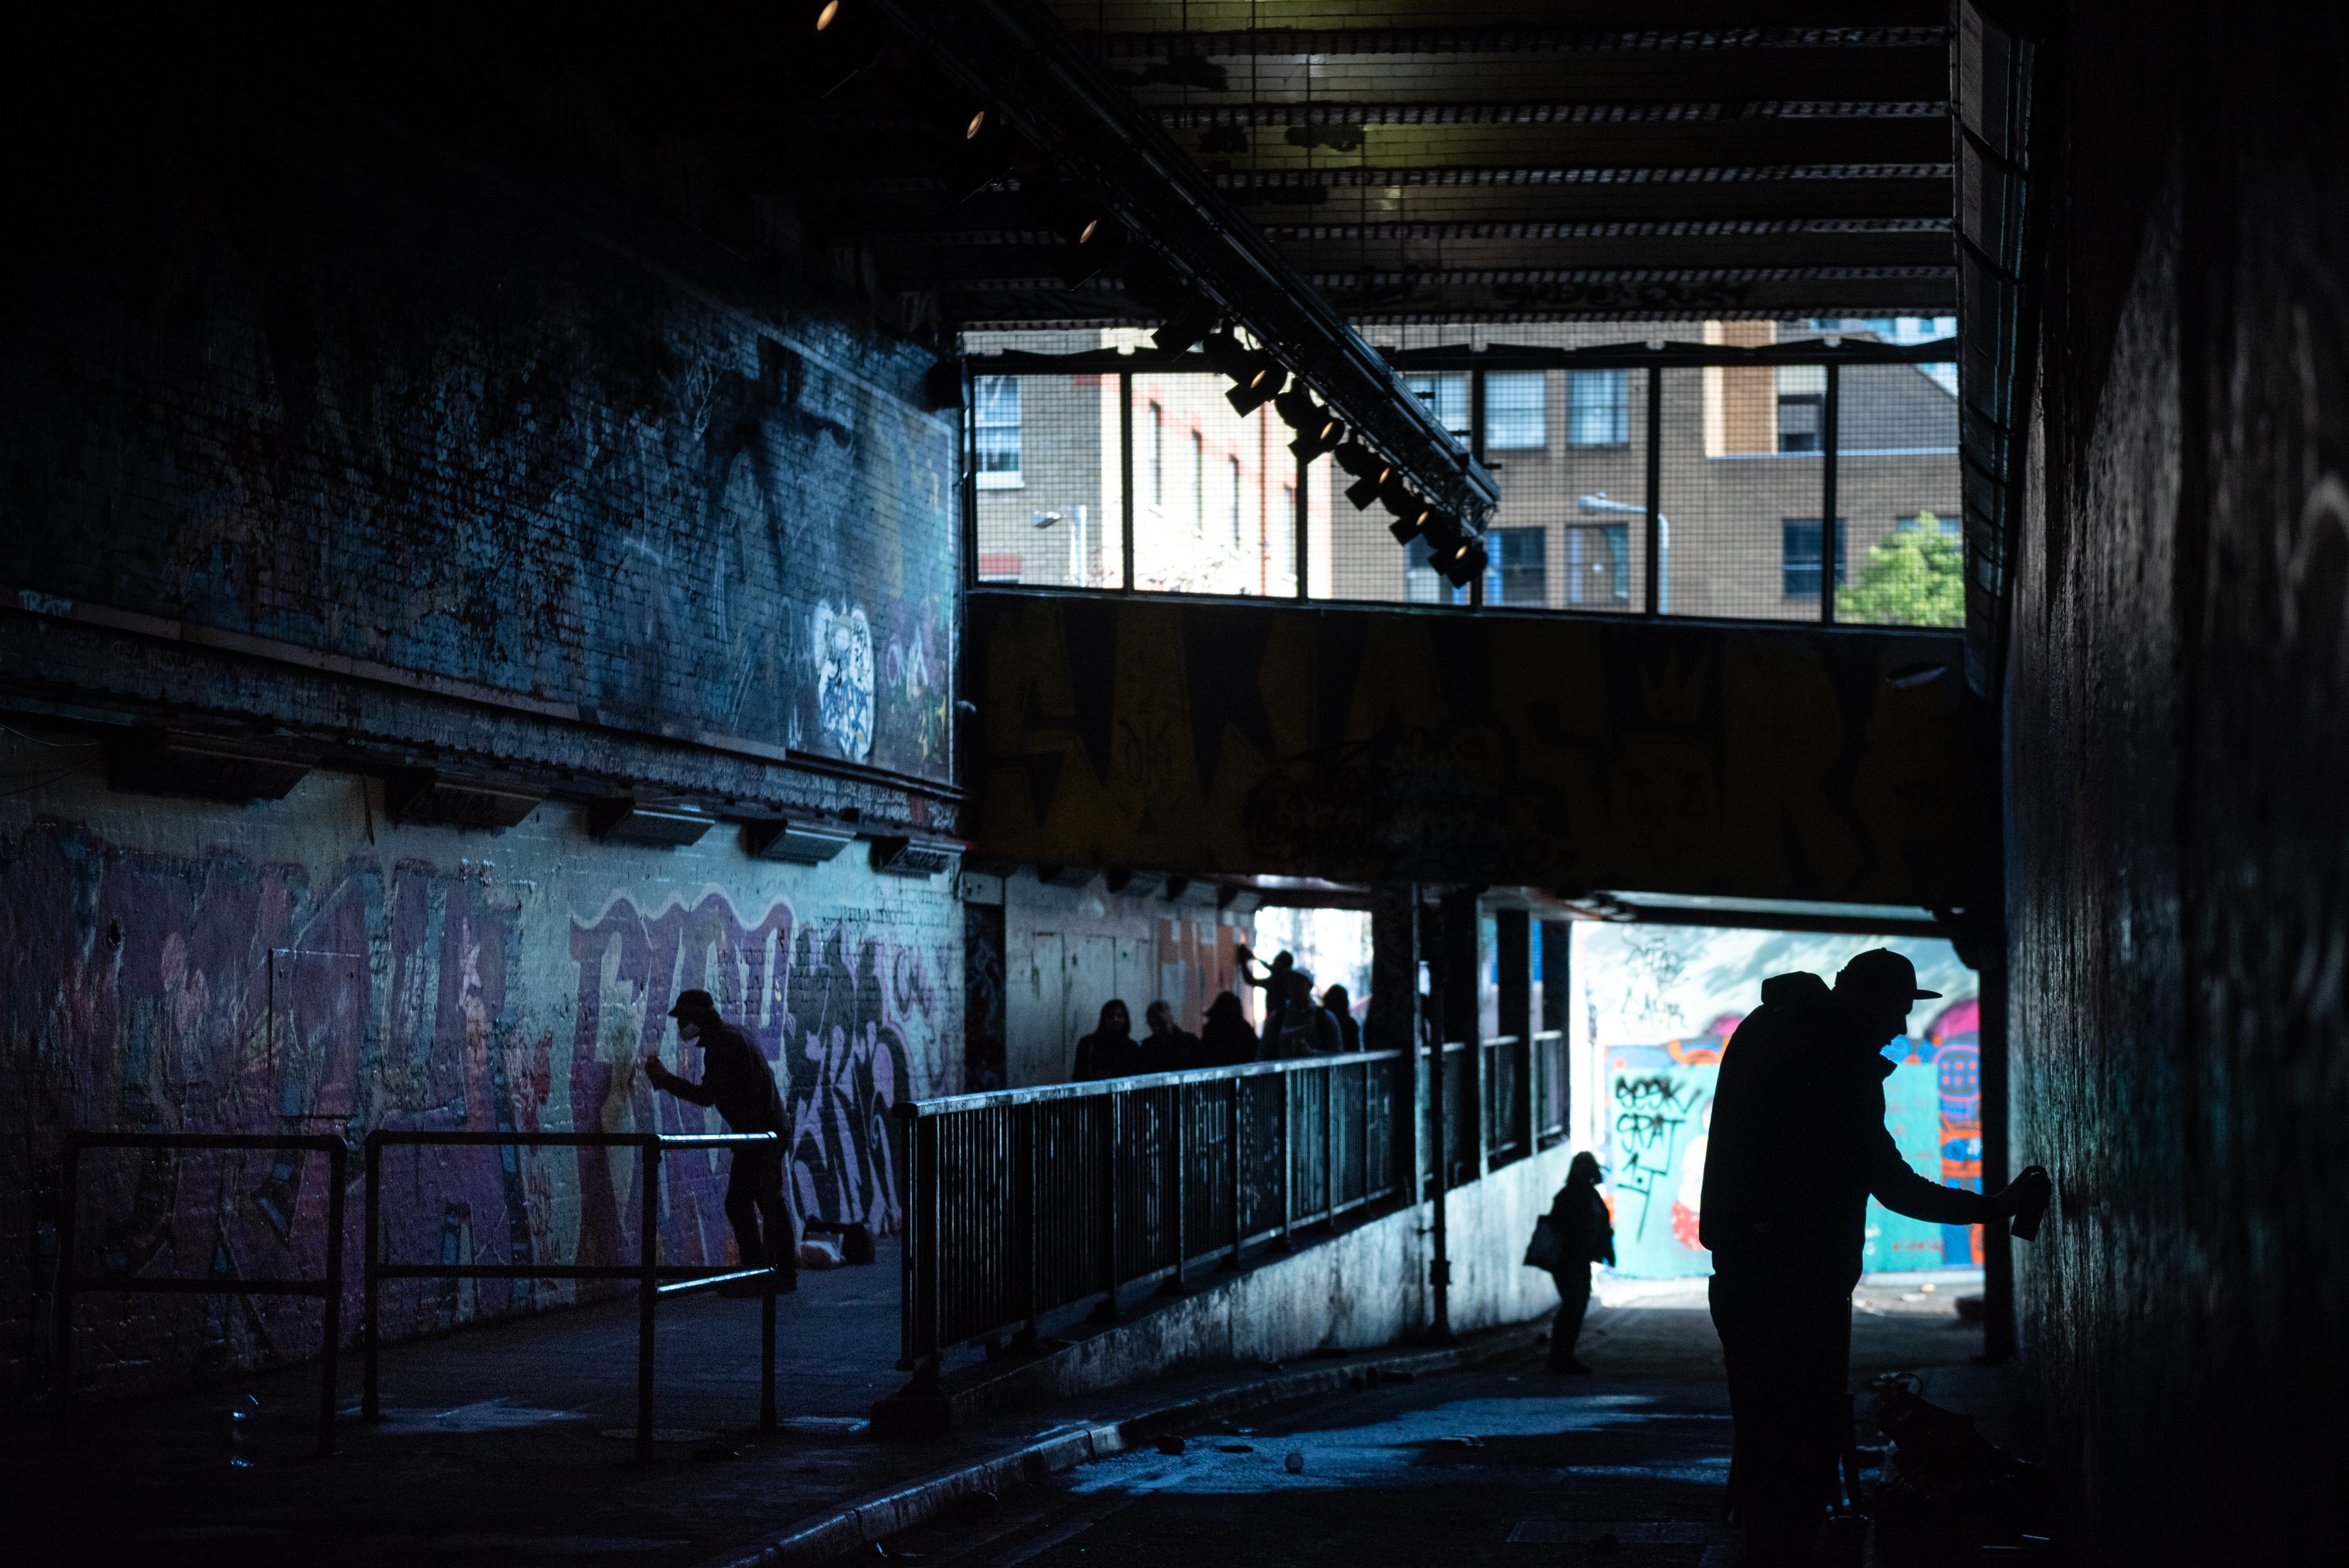 ULTIMATE INTRODUCTION TO PHOTOGRAPHY: SOUTH BANK, LONDON